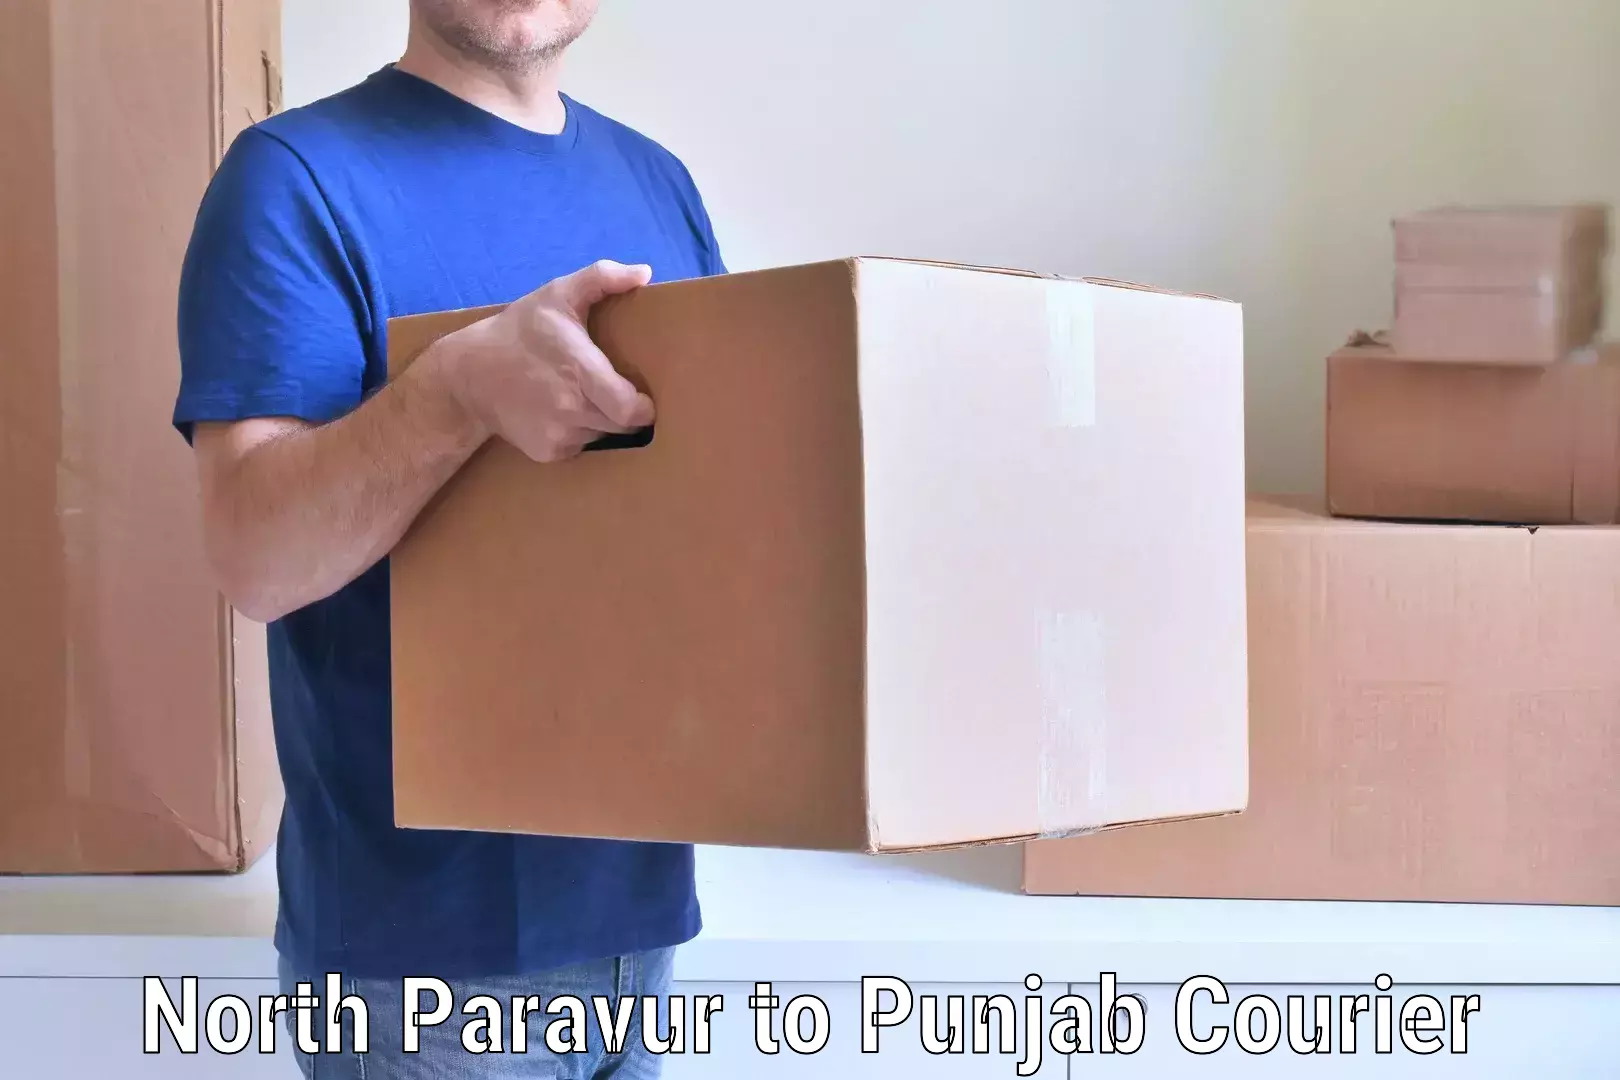 Trusted household movers North Paravur to Punjab